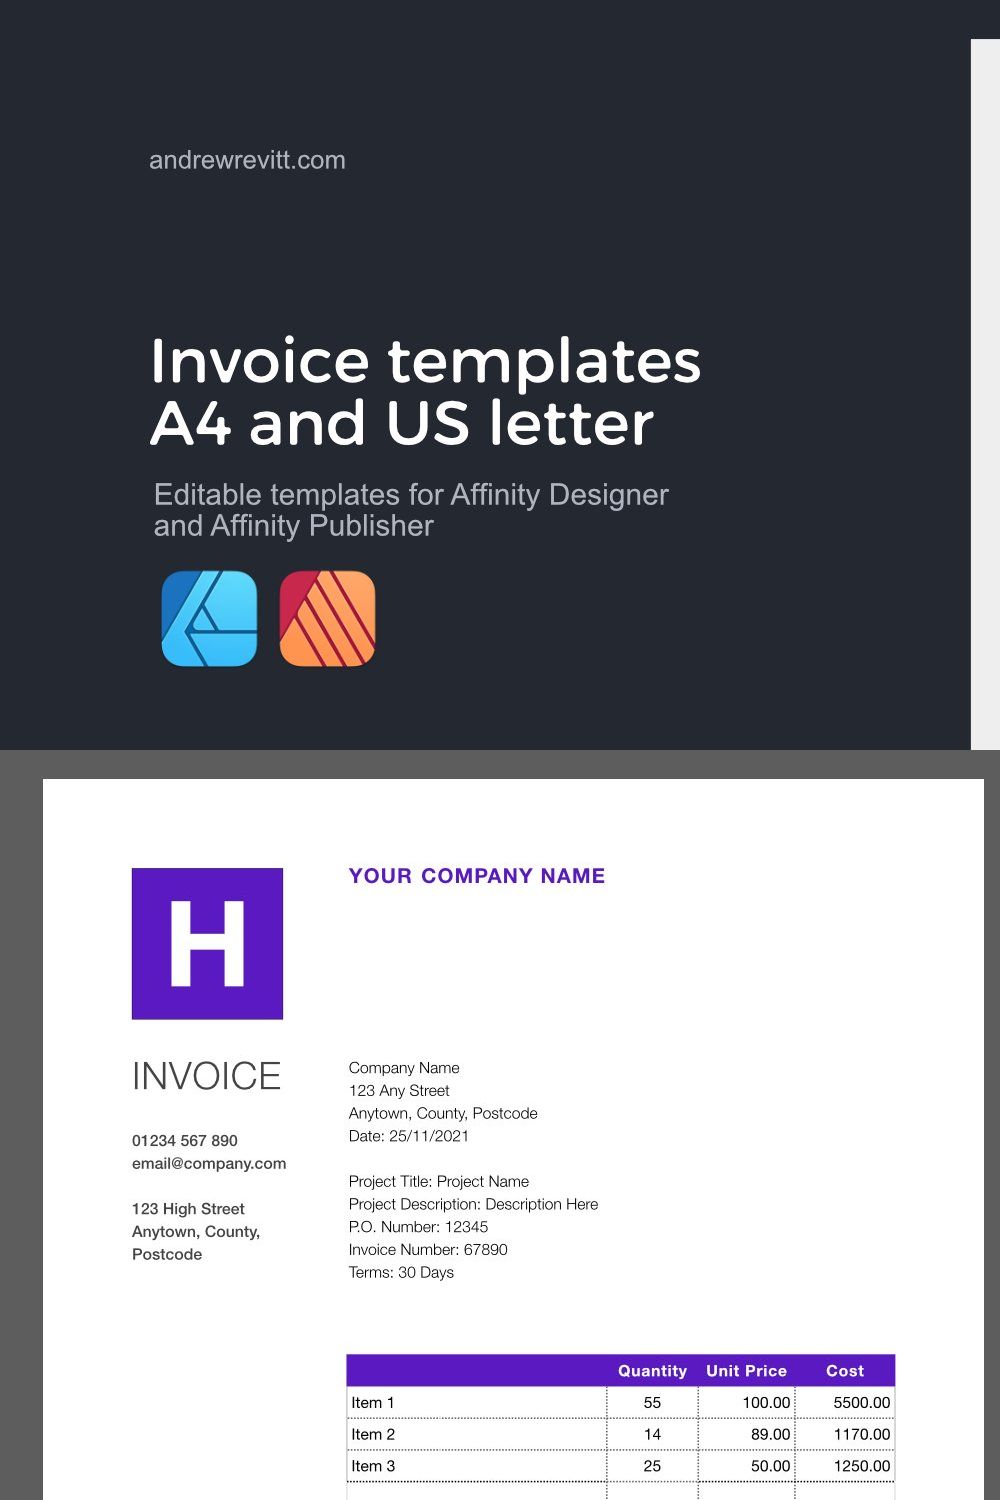 Invoice templates for Affinity pinterest preview image.